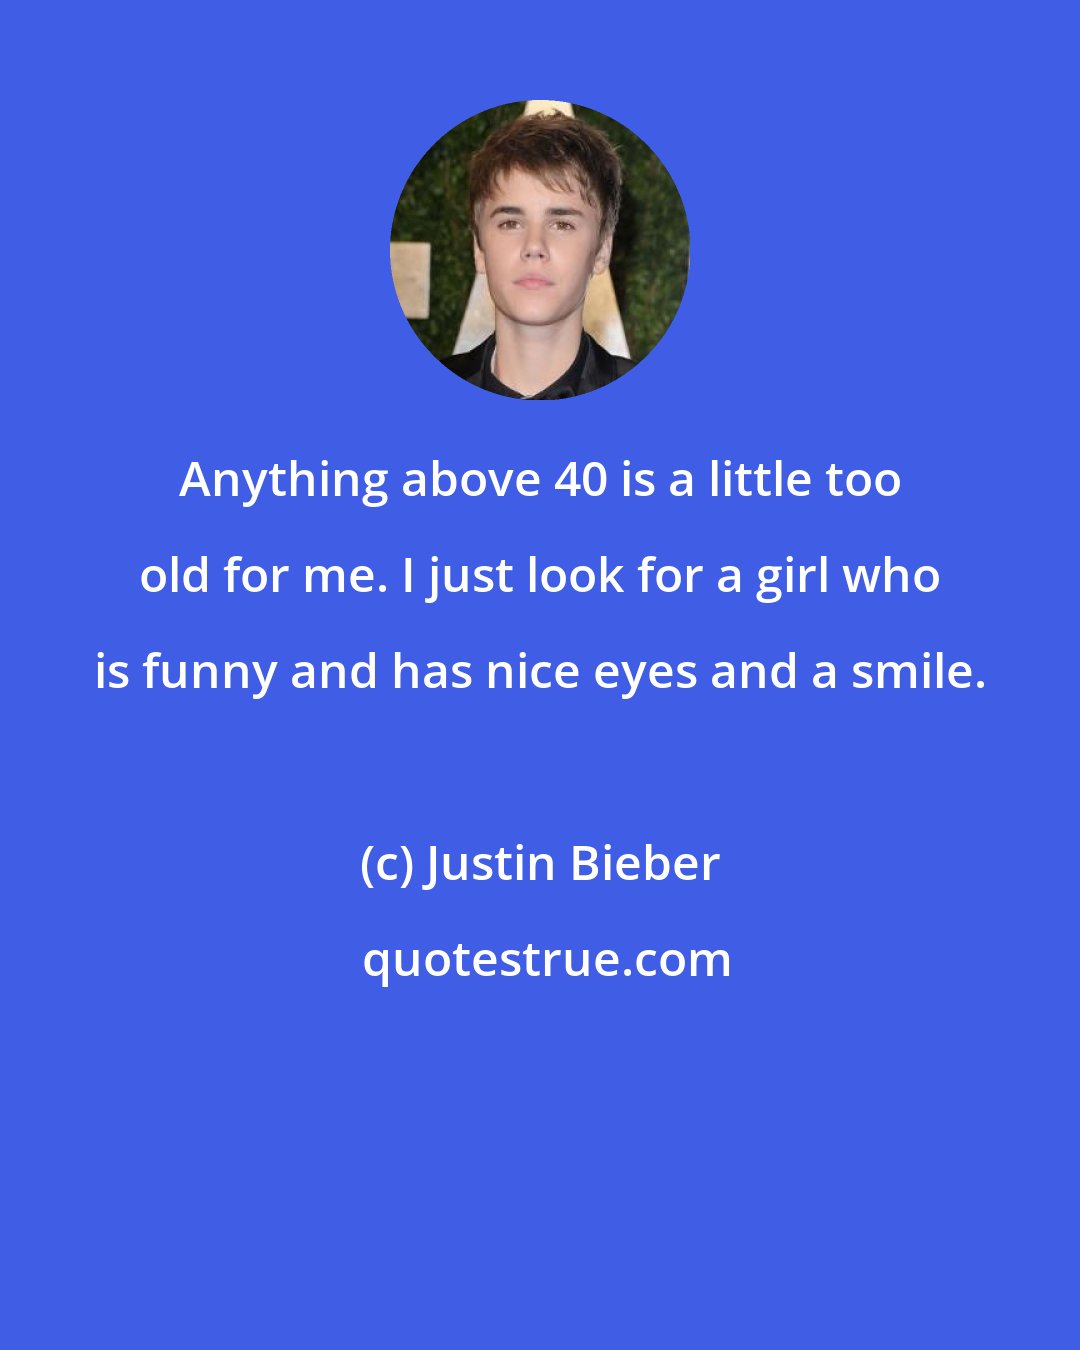 Justin Bieber: Anything above 40 is a little too old for me. I just look for a girl who is funny and has nice eyes and a smile.